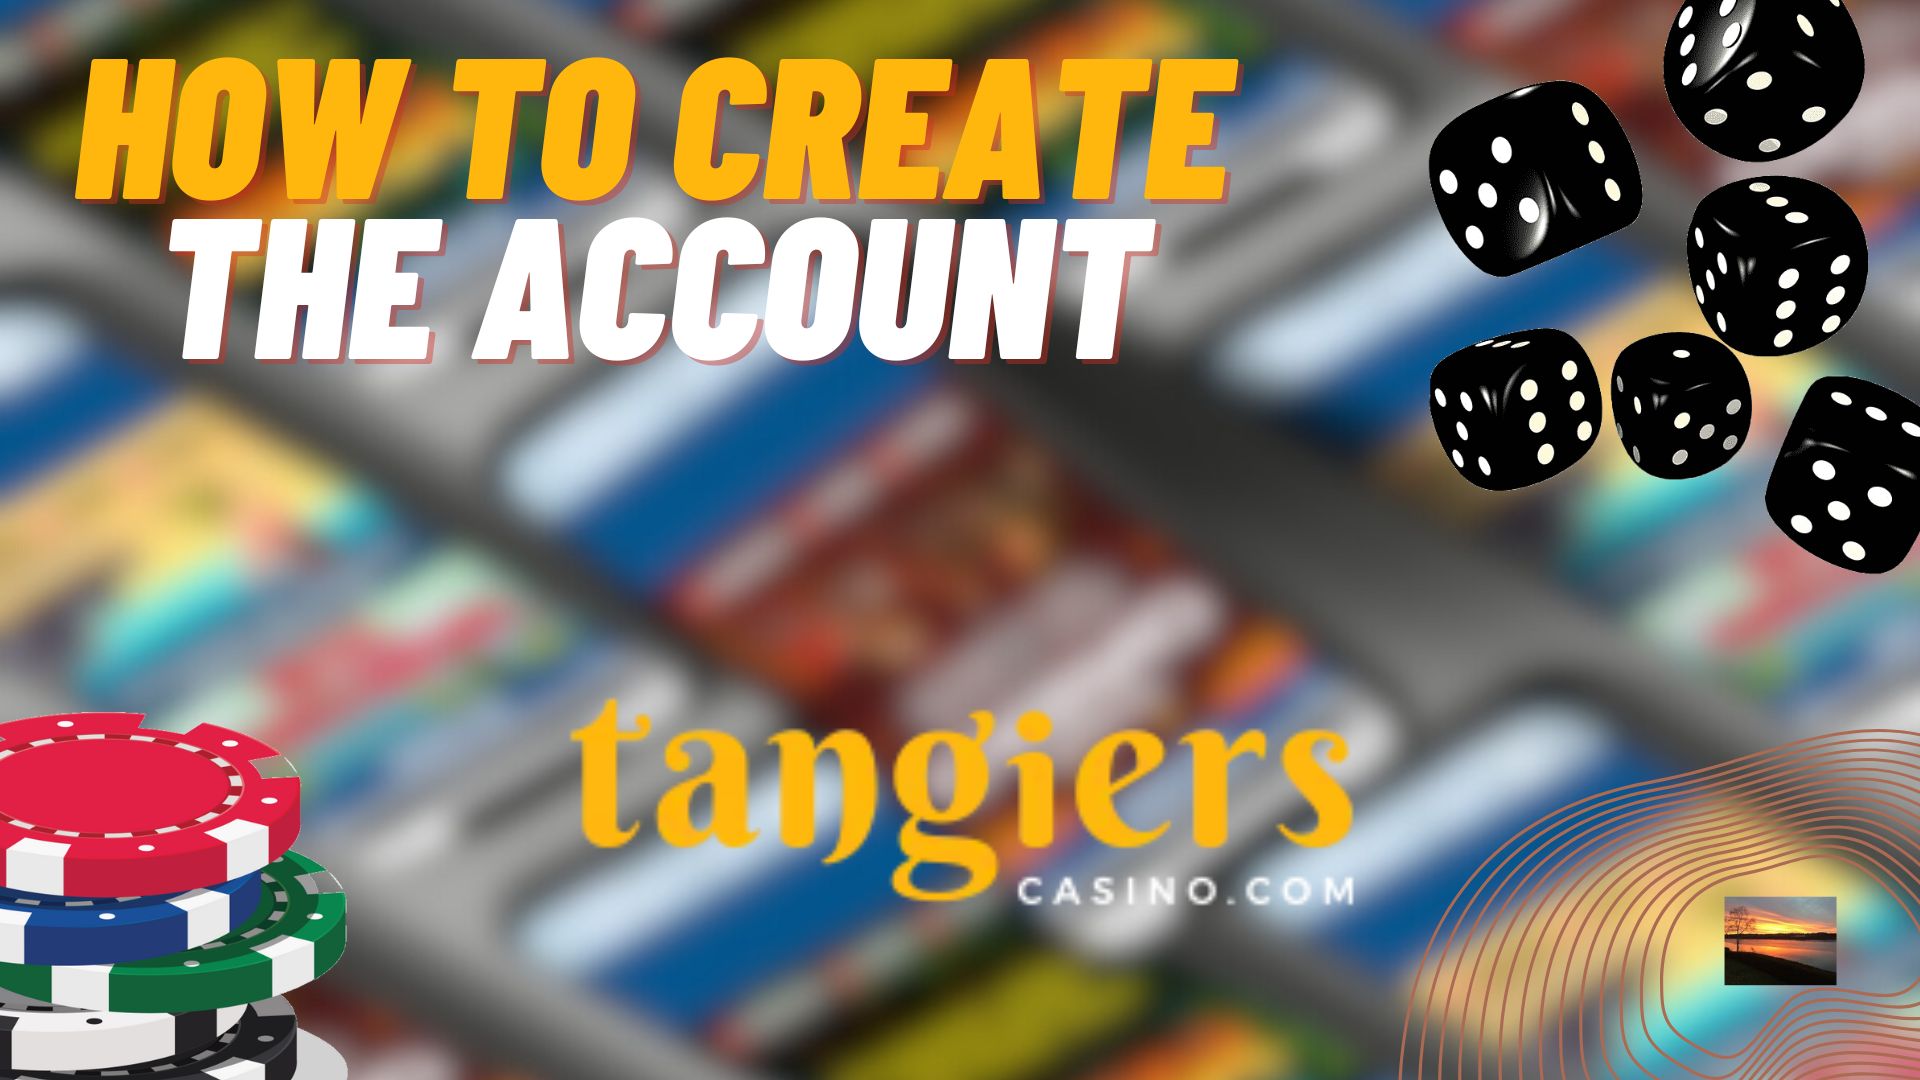 How to create the account